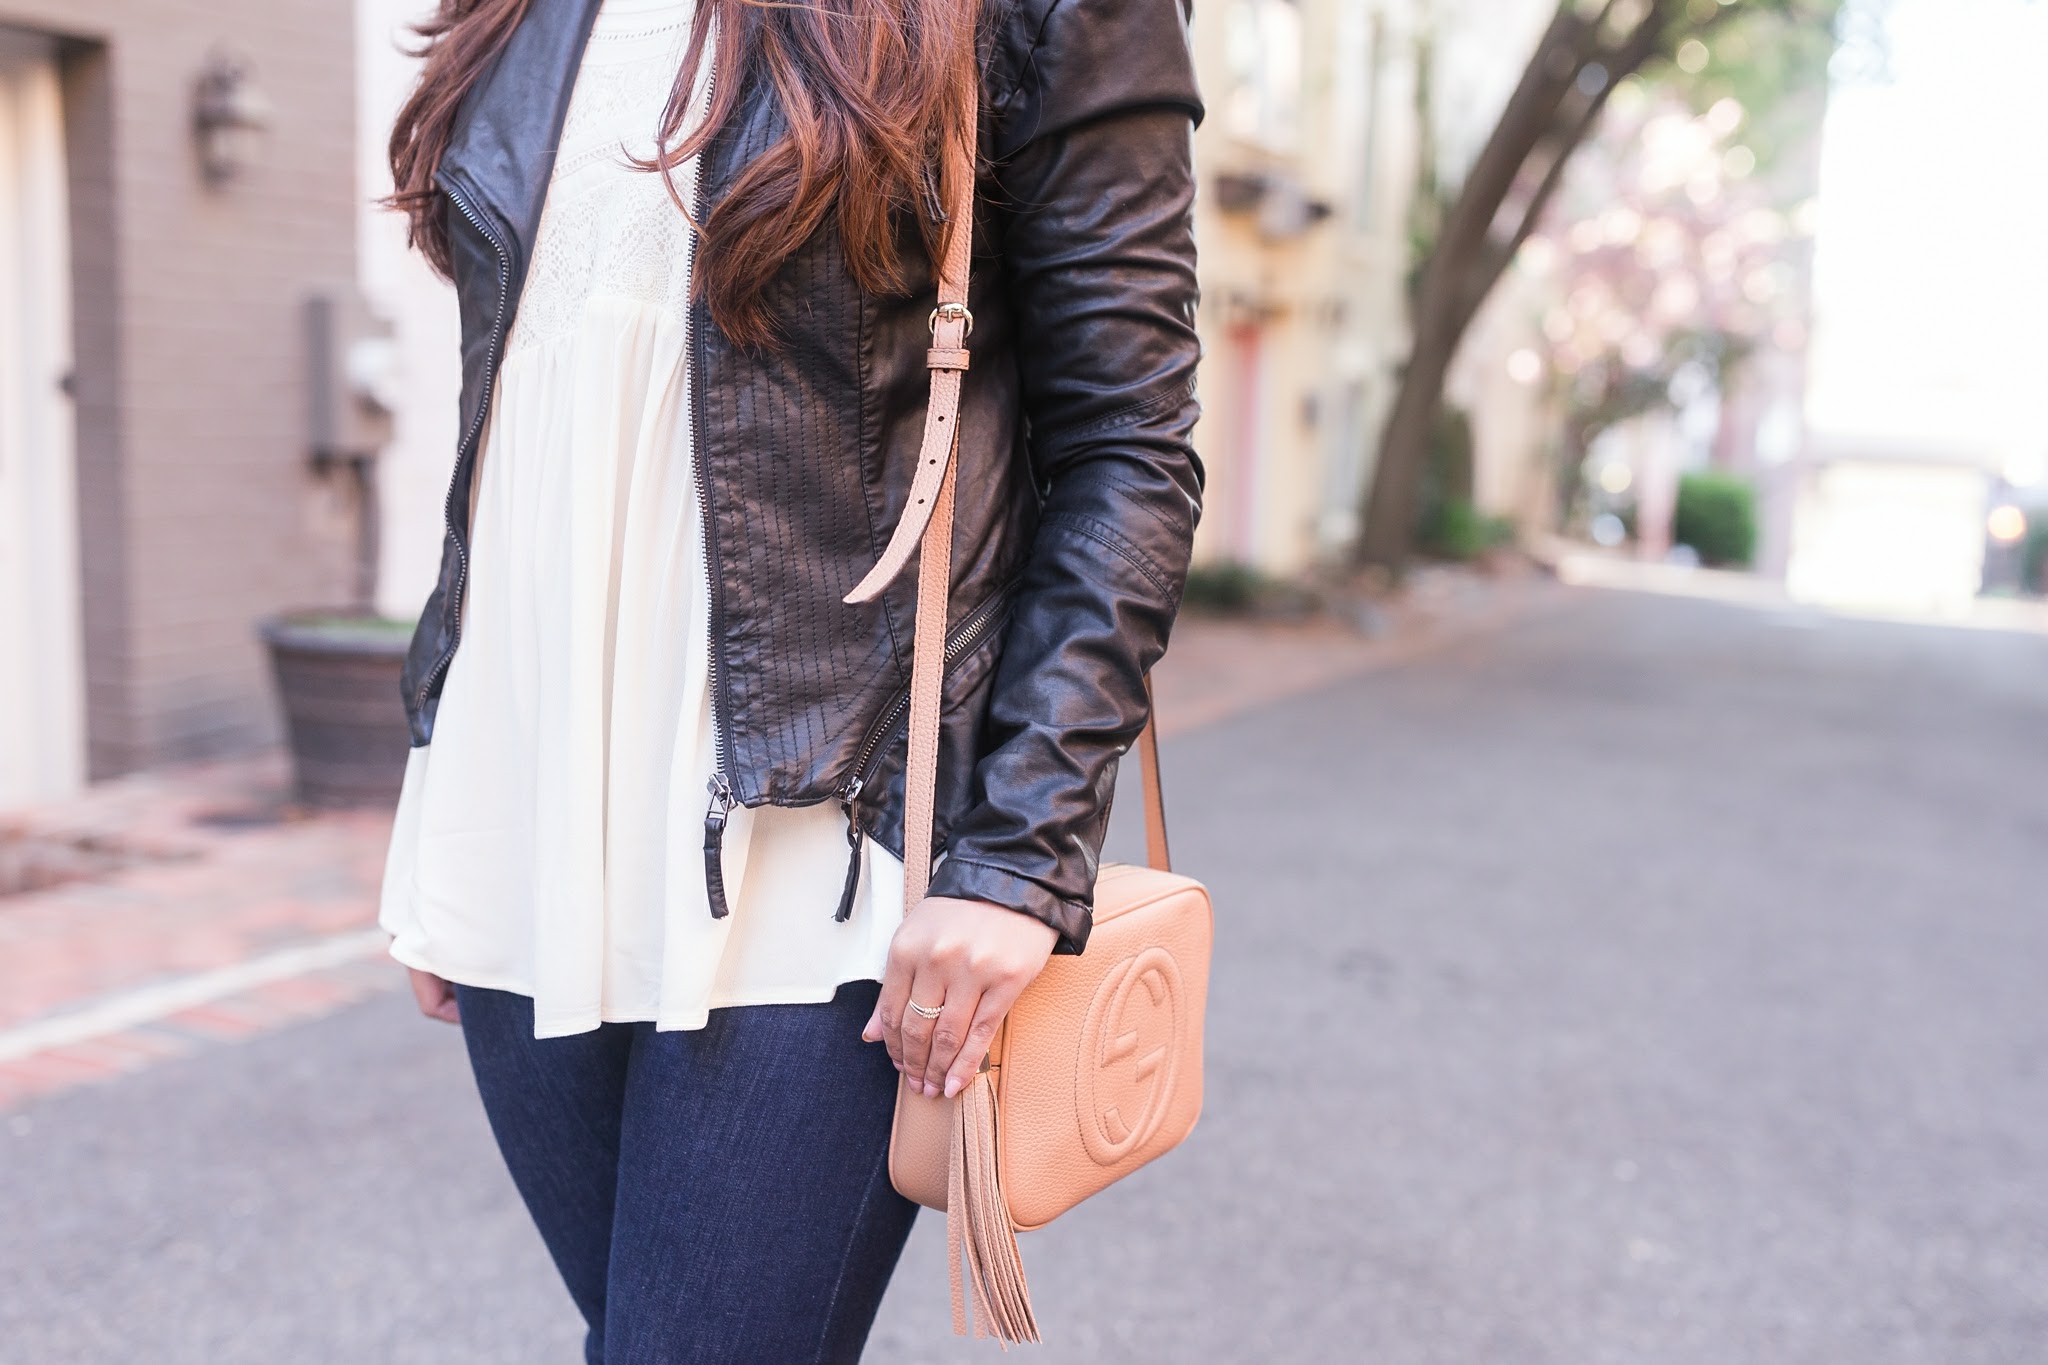 Perfect Transitional Jacket BLANKNYC - Stylista Esquire - @stylistaesquire